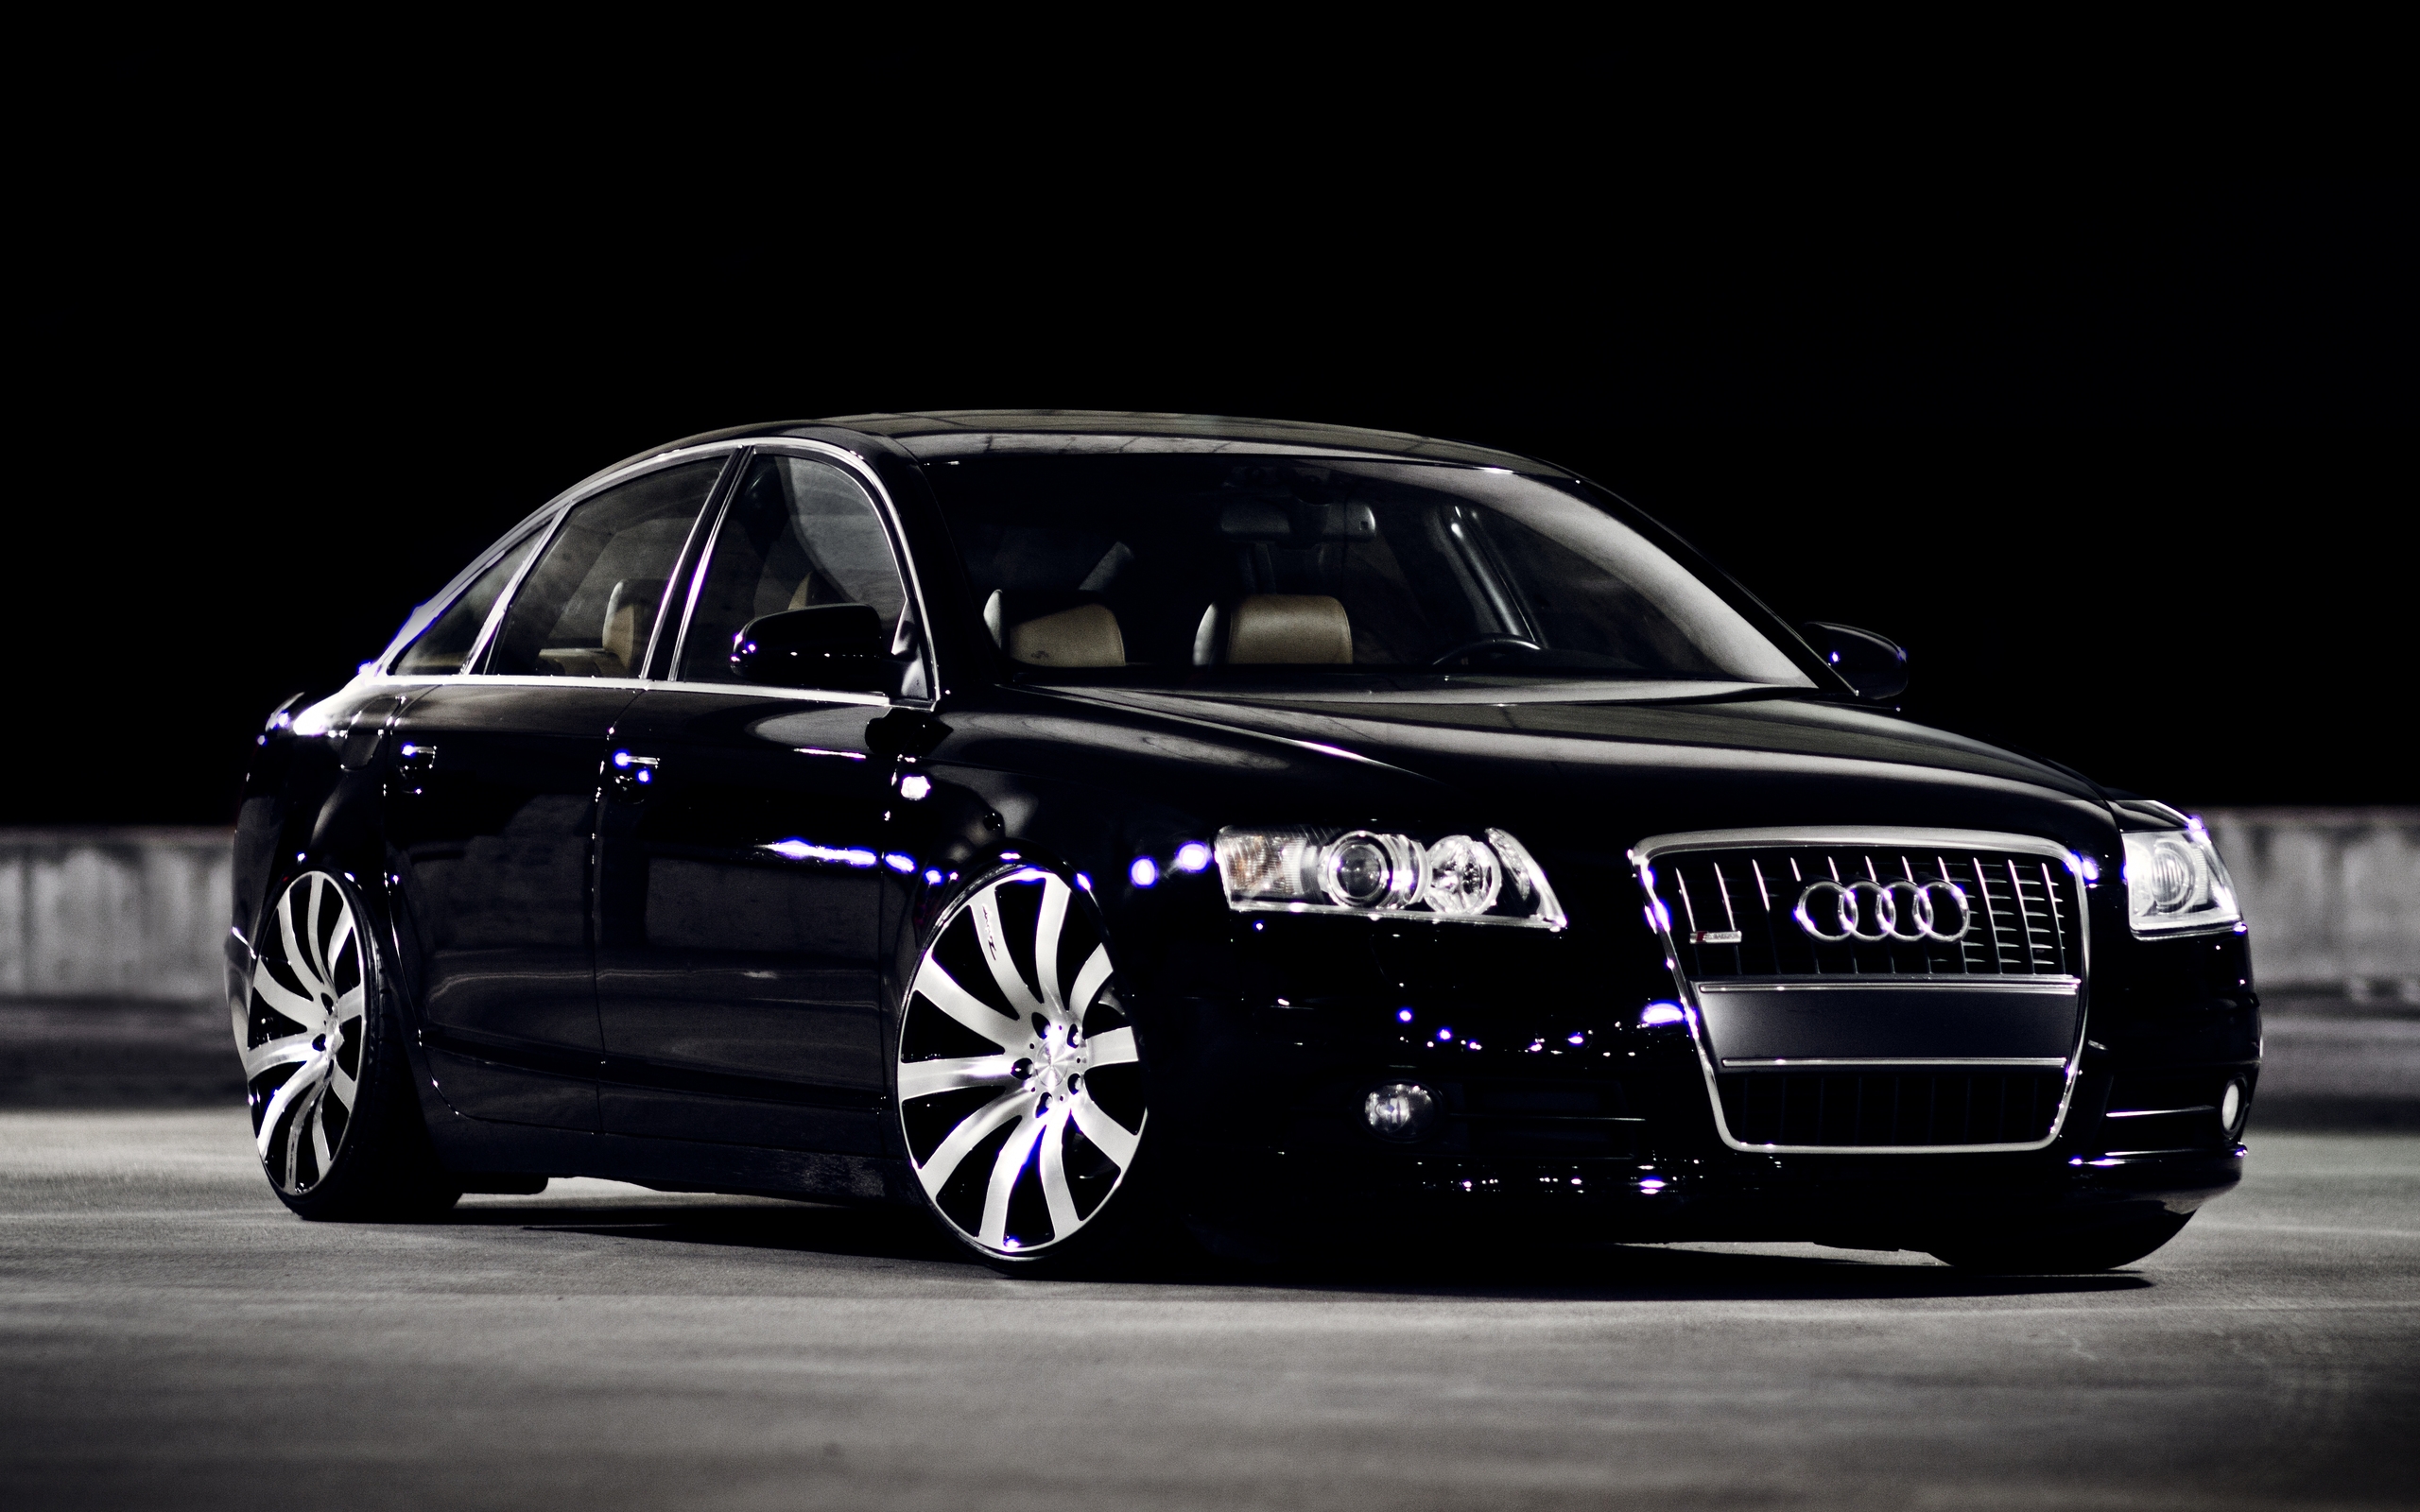 Audi Car Image Wallpaper Best Re Every Time